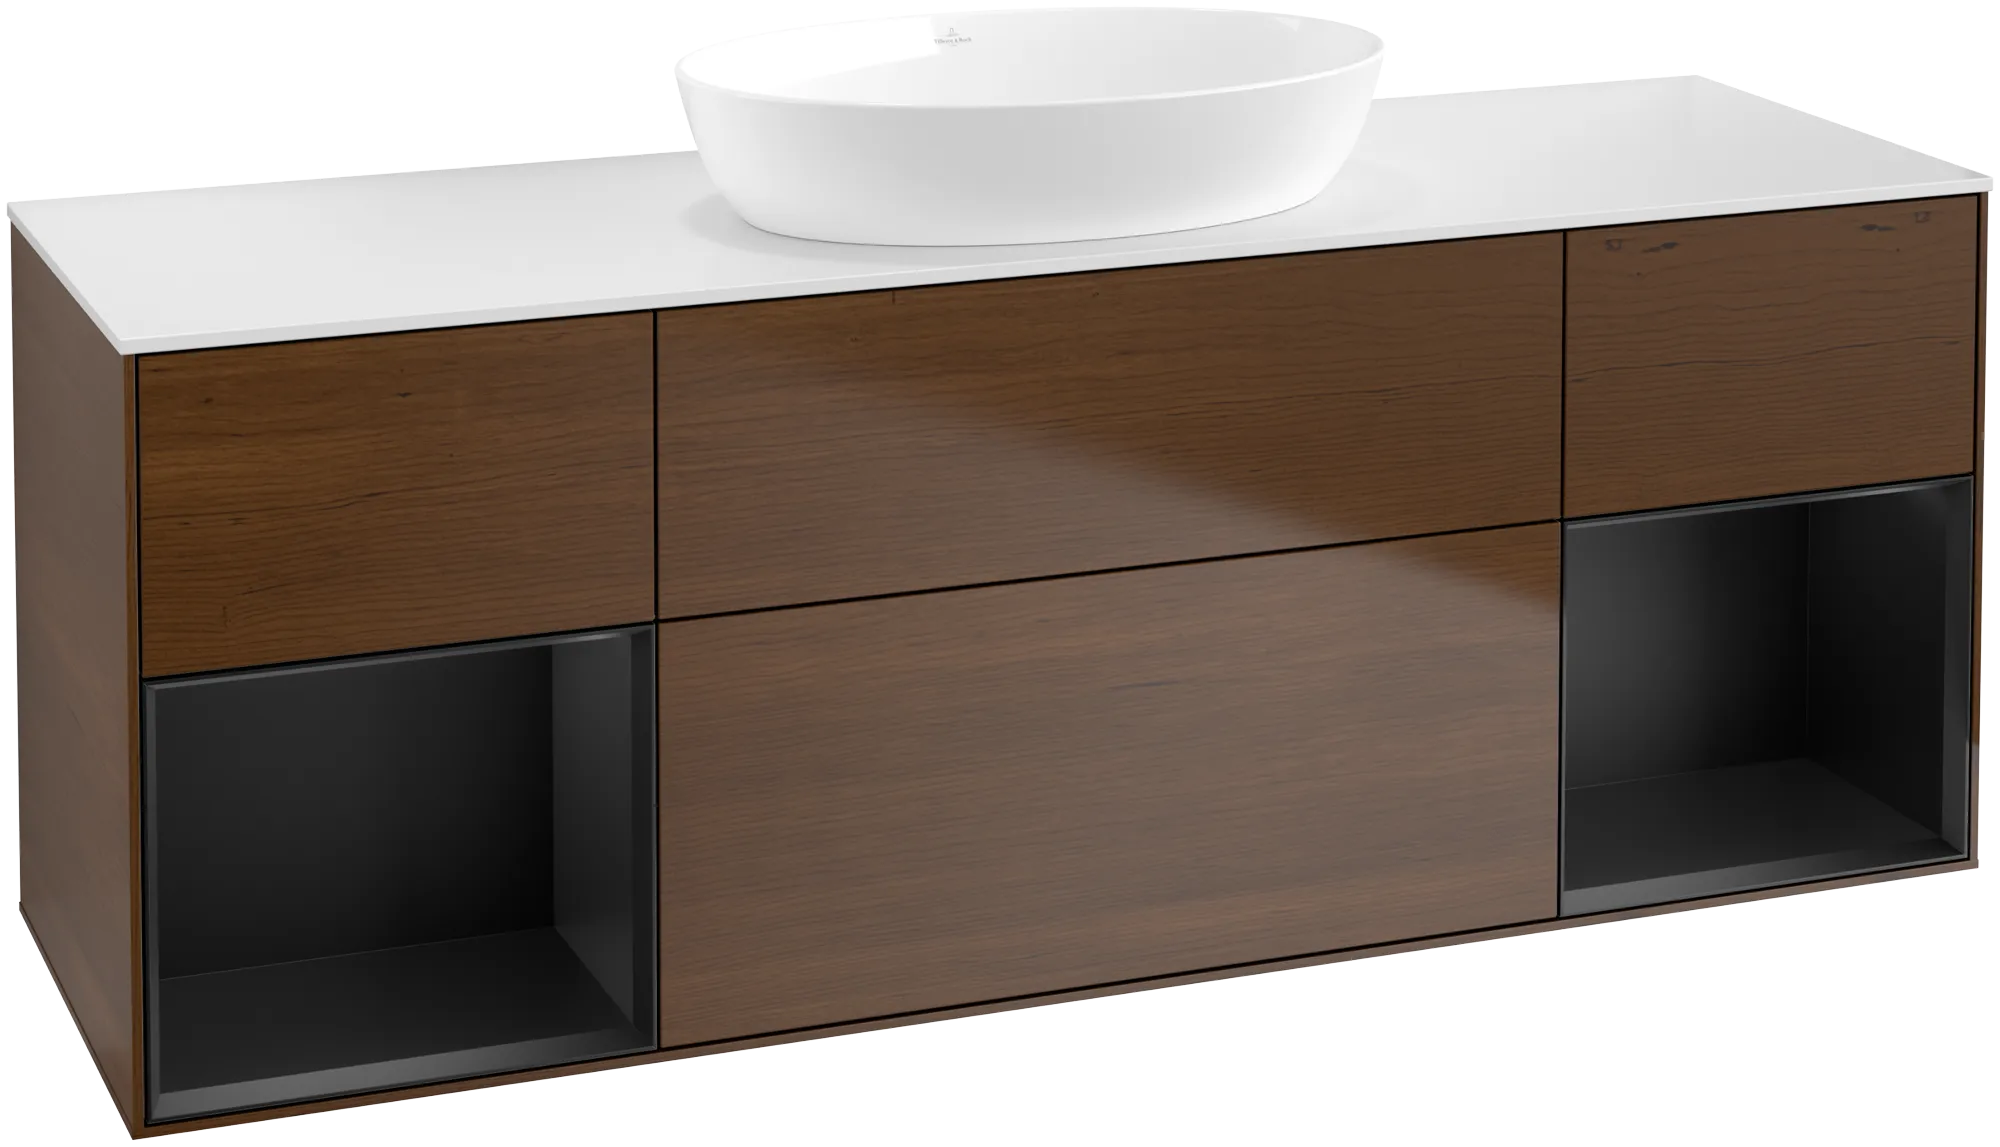 Picture of VILLEROY BOCH Finion Vanity unit, with lighting, 4 pull-out compartments, 1600 x 603 x 501 mm, Walnut Veneer / Black Matt Lacquer / Glass White Matt #GD01PDGN